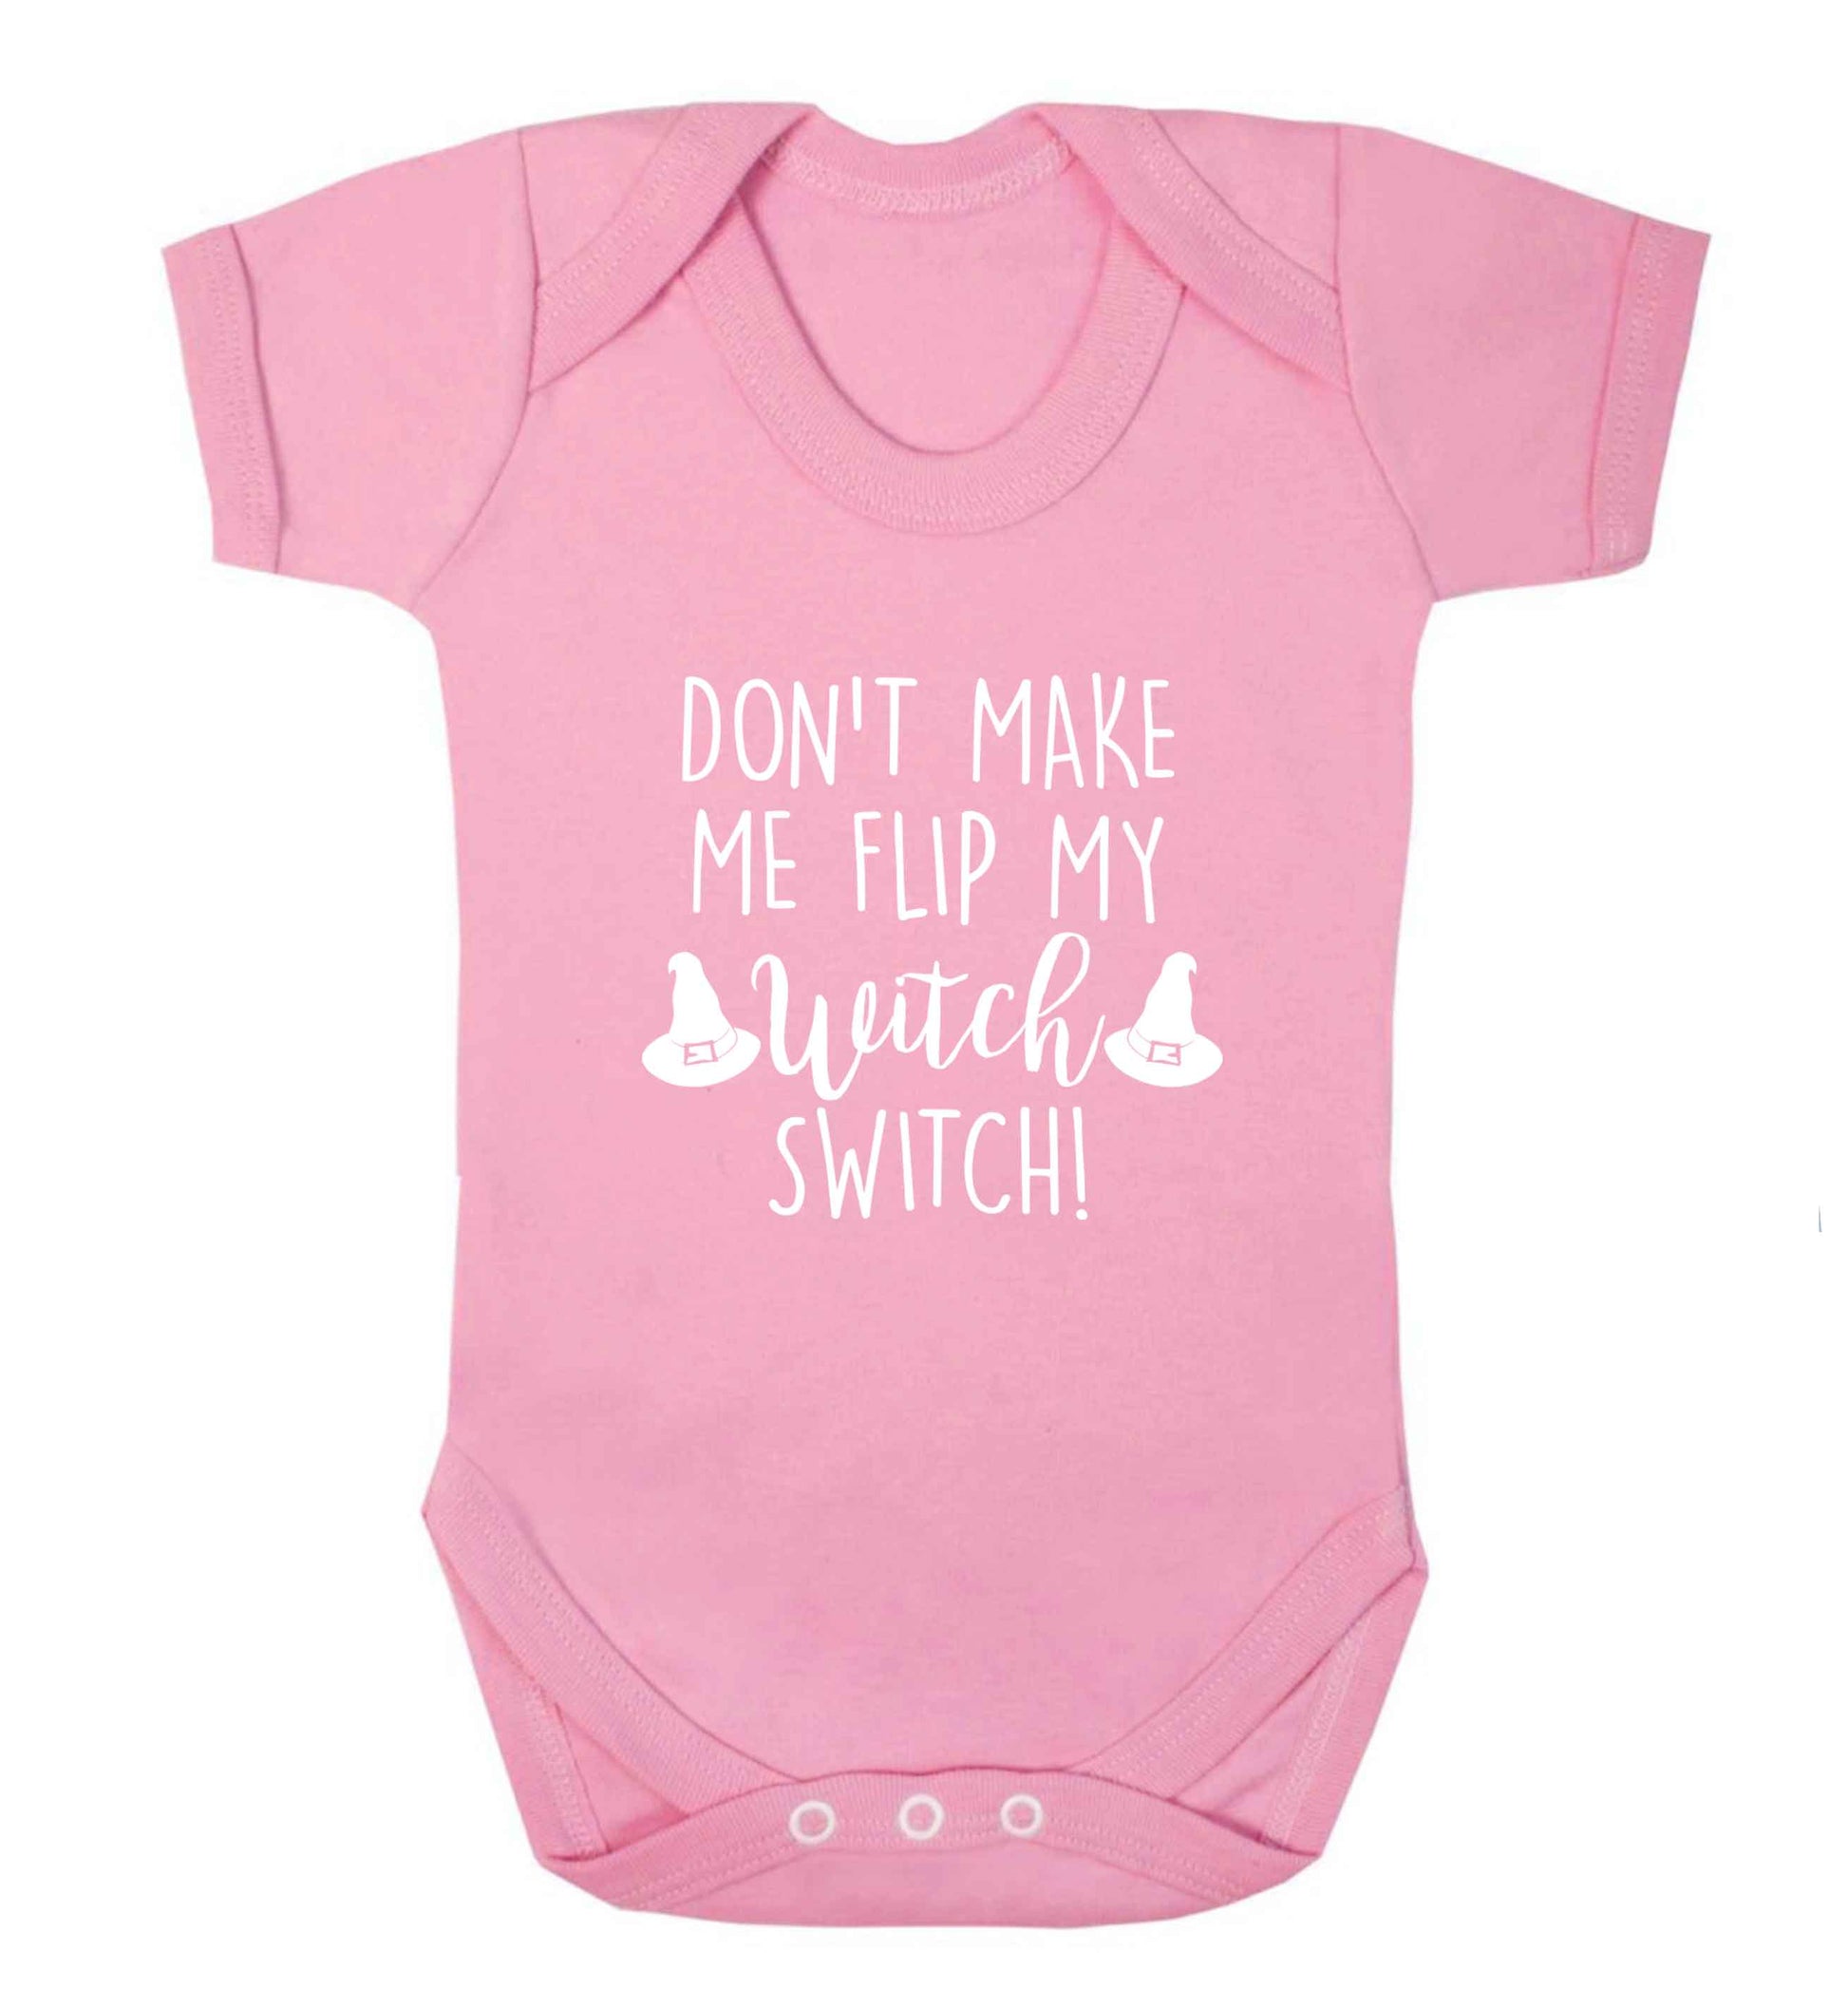 Don't make me flip my witch switch baby vest pale pink 18-24 months